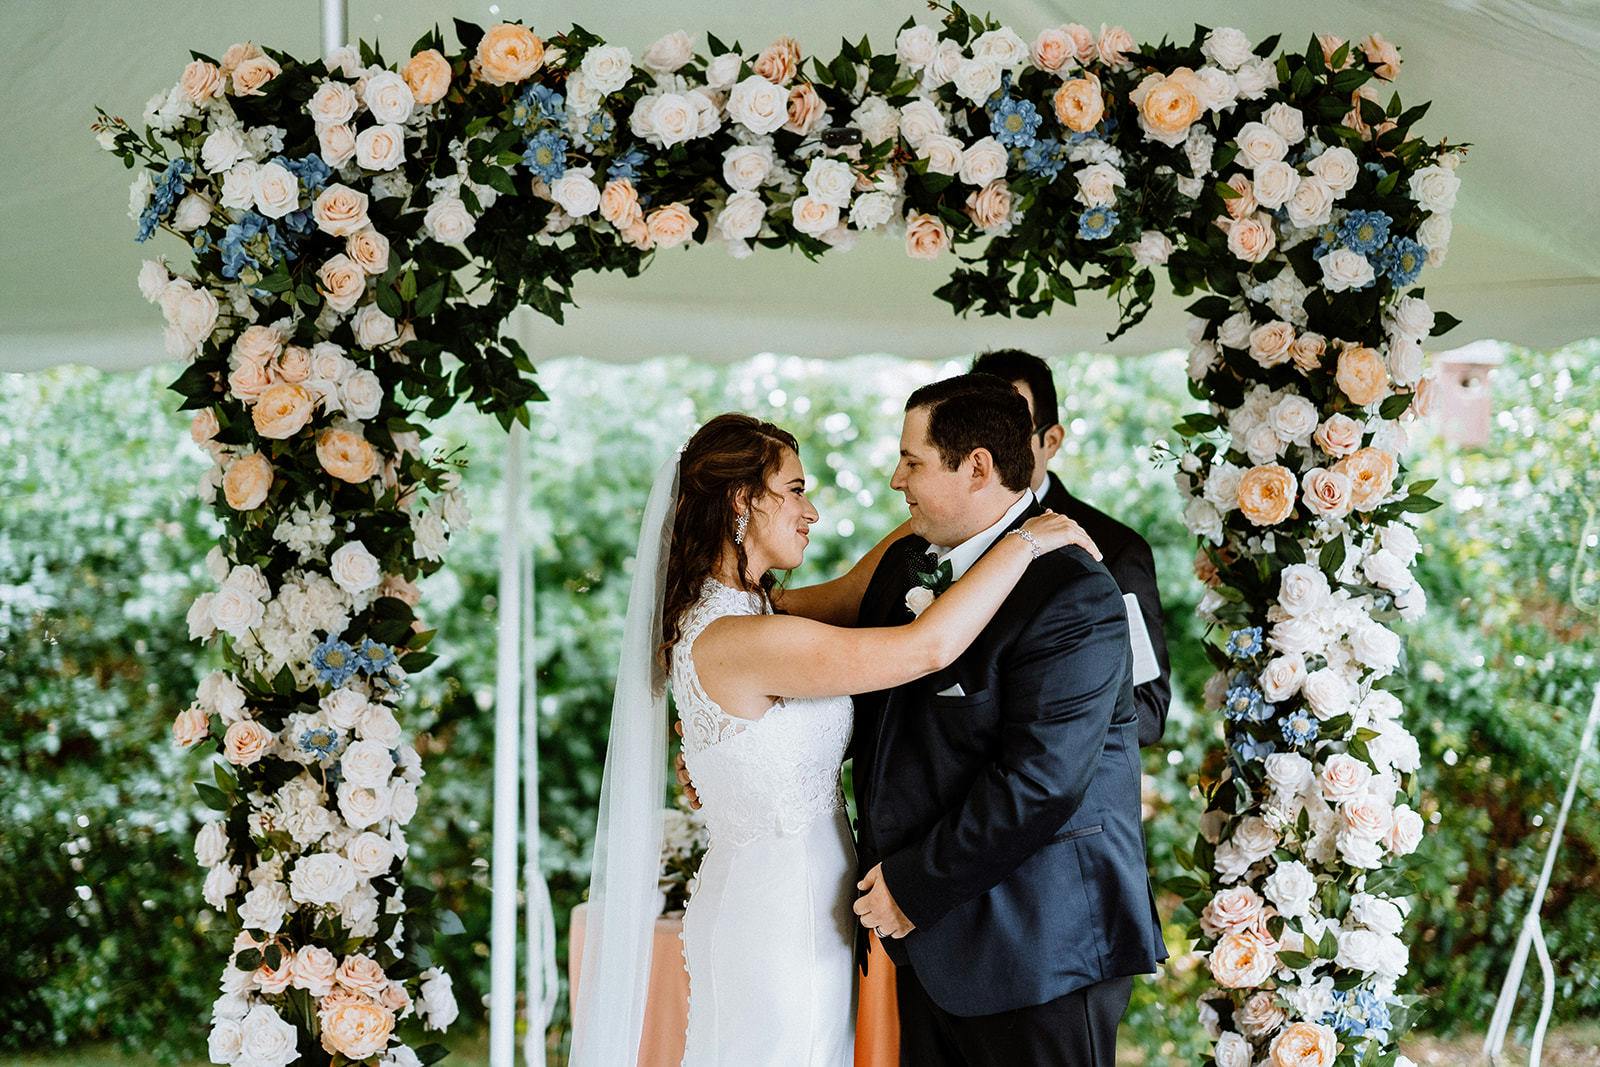 Intimate Pandemic Wedding with Virtual Guests and a Celebrity Planner Host